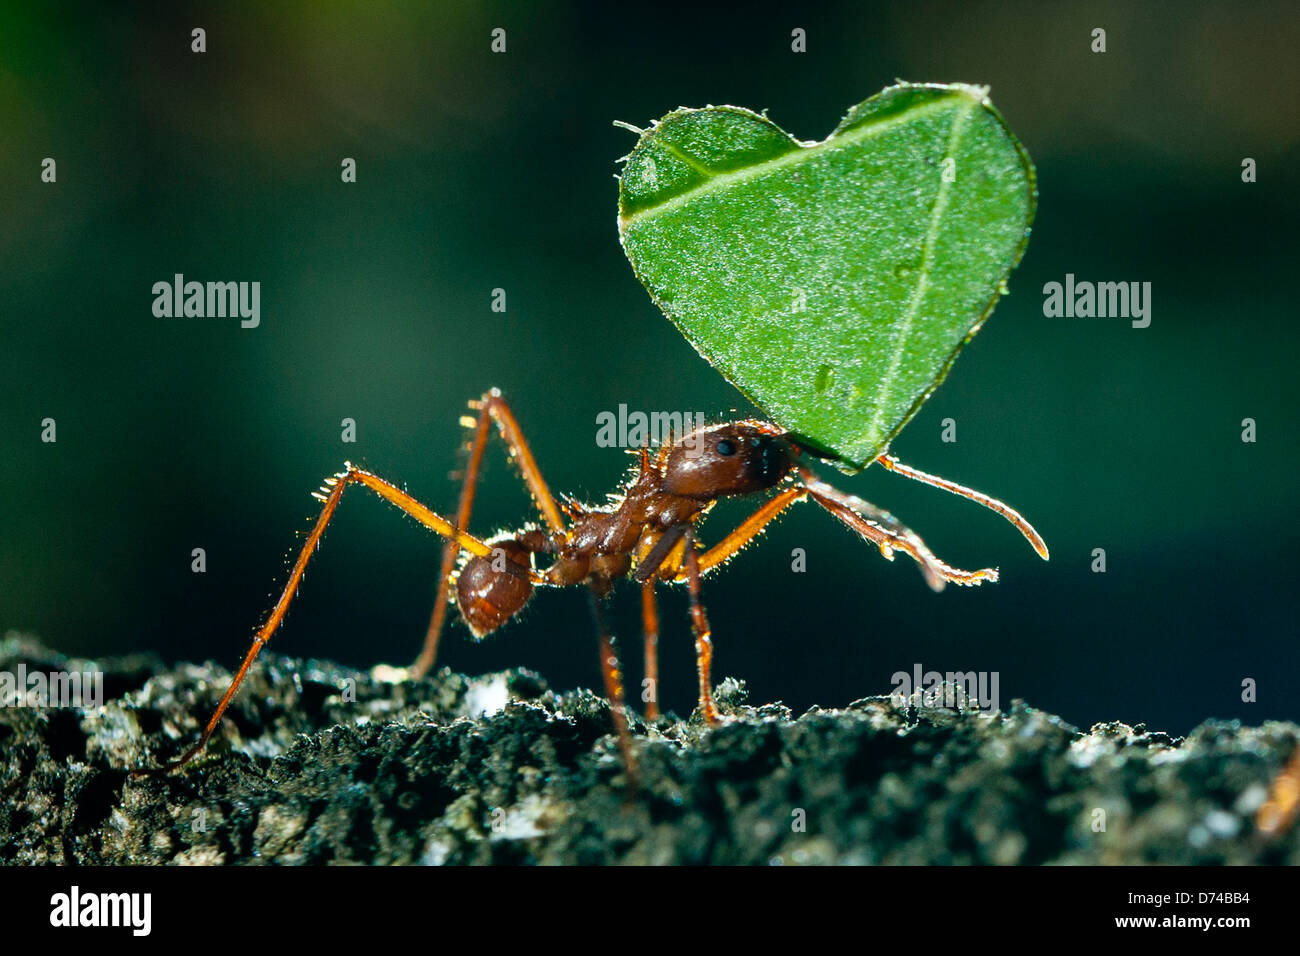 A leaf cutter ant carrying a heart shaped leaf. Stock Photo